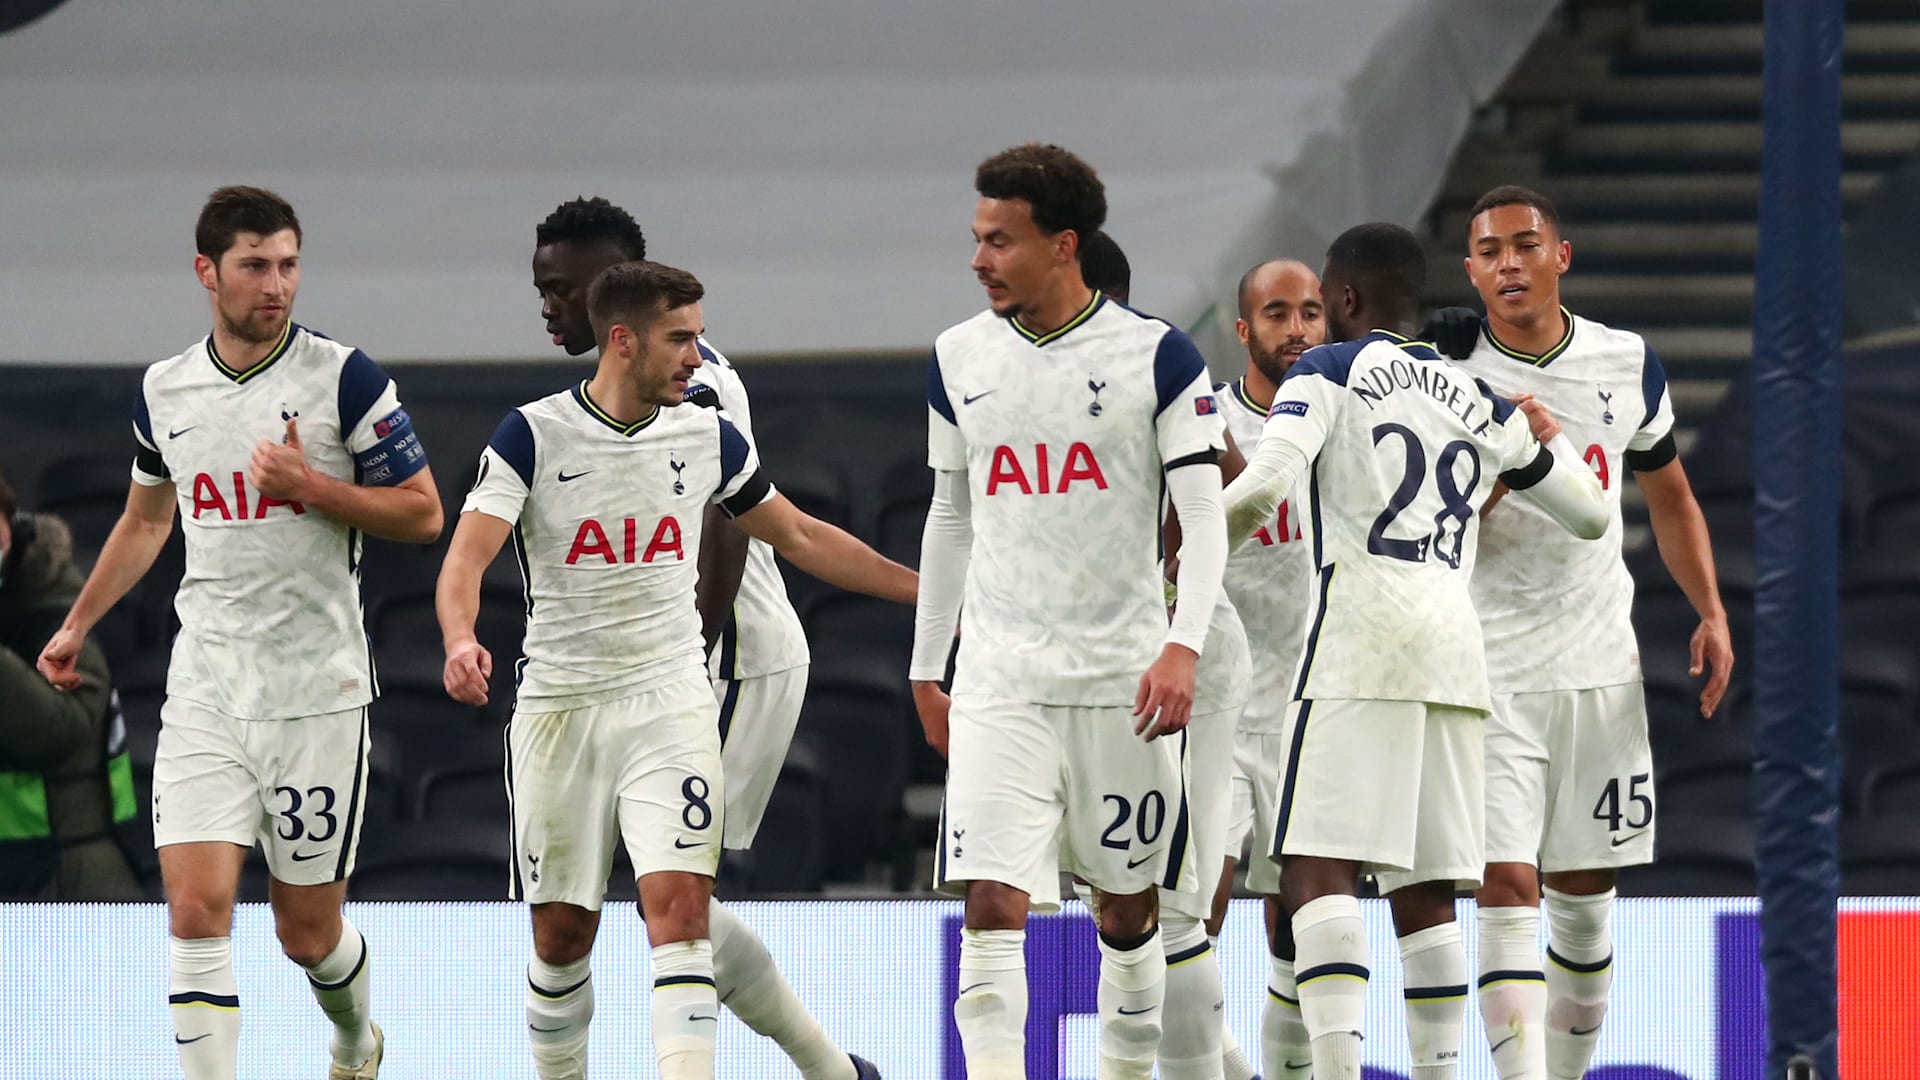 UEFA Europa League 2020-21 fixtures, get Tottenham and Arsenal's schedule in matchweek 6 and know where to watch live in India